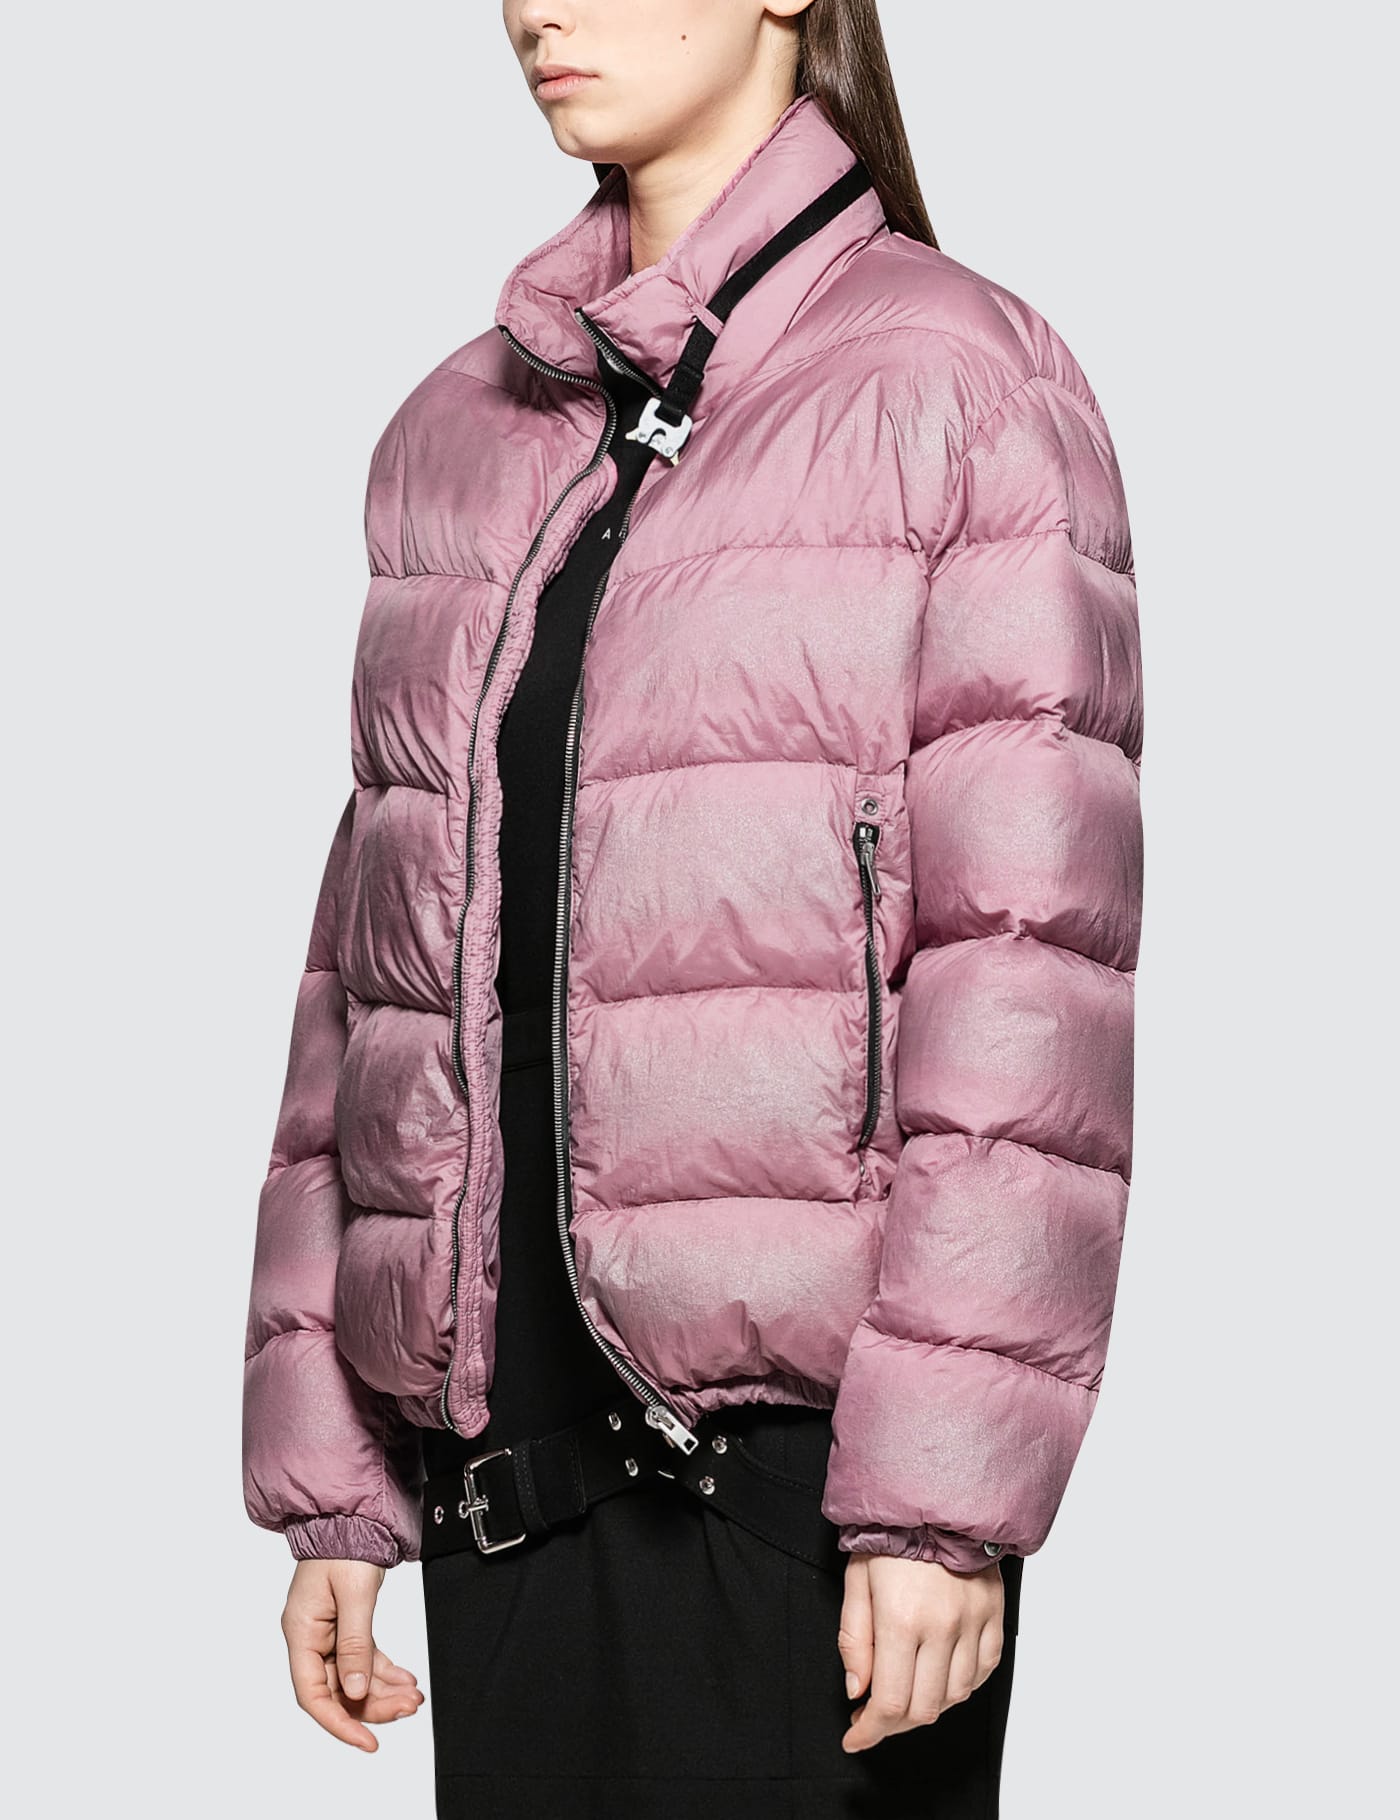 1017 ALYX 9SM - Classic Puffer Jacket | HBX - Globally Curated 